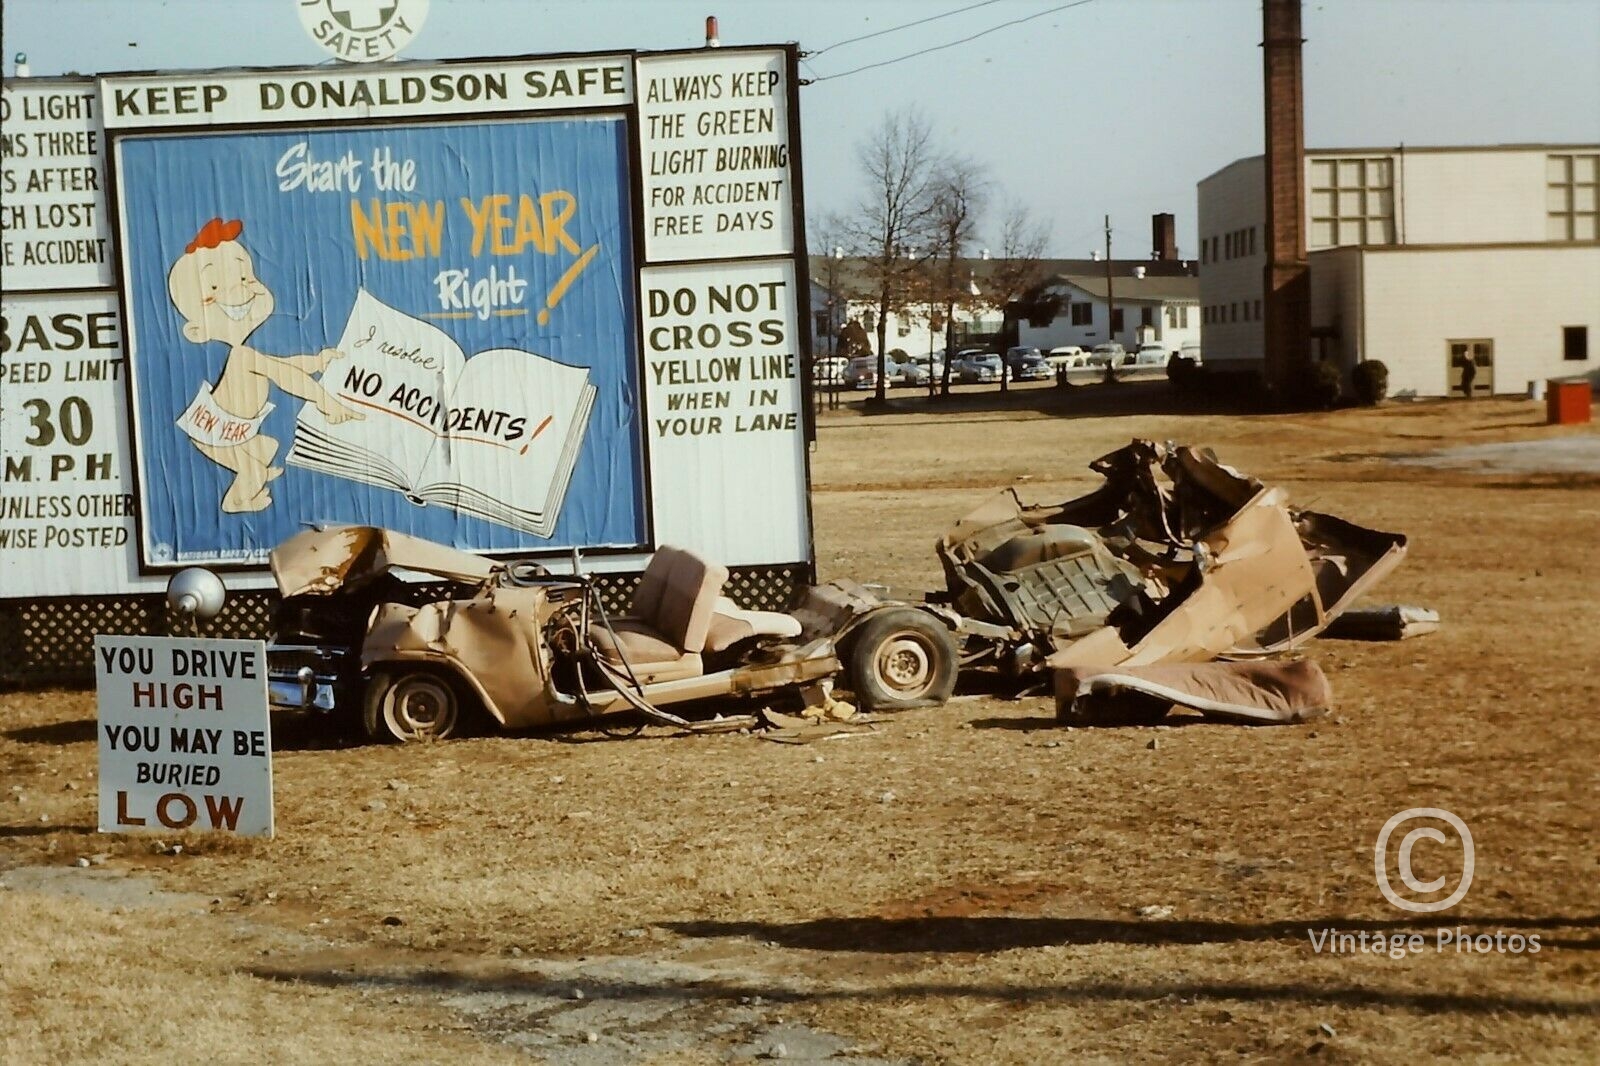 1950s Safety Billboard and Staged Car Crash warning drivers to slow down